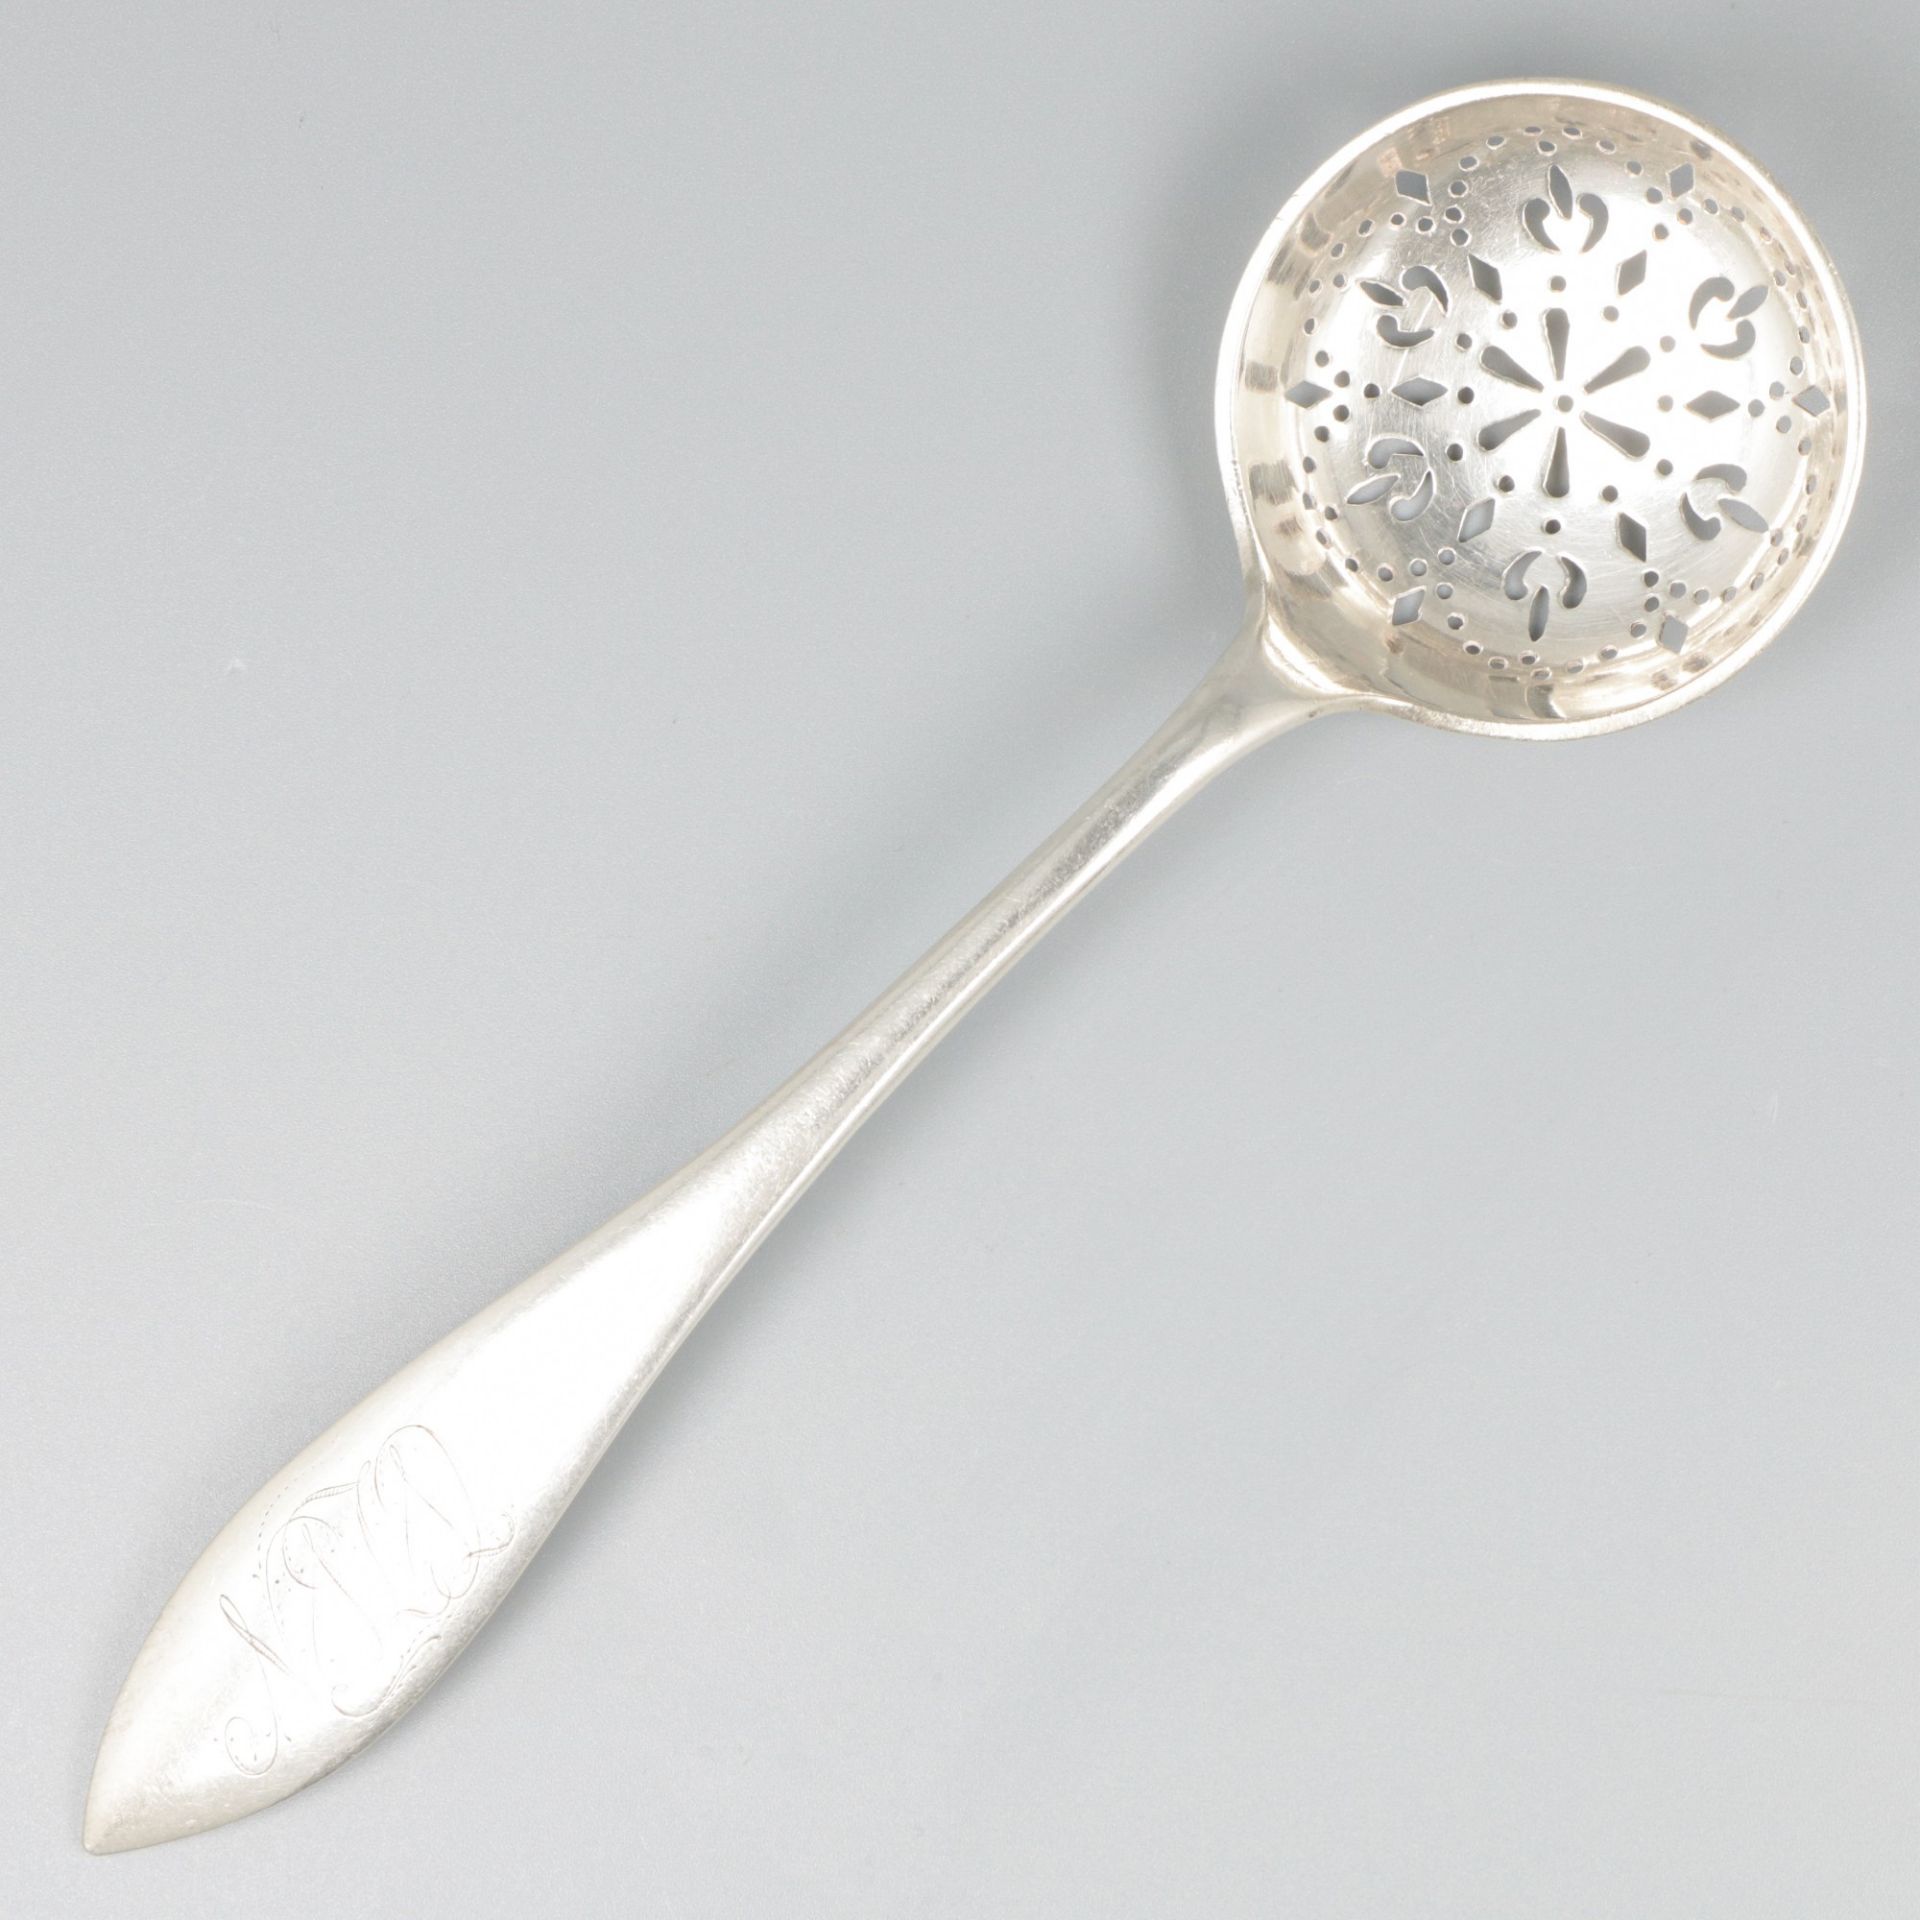 Sifter spoon silver.